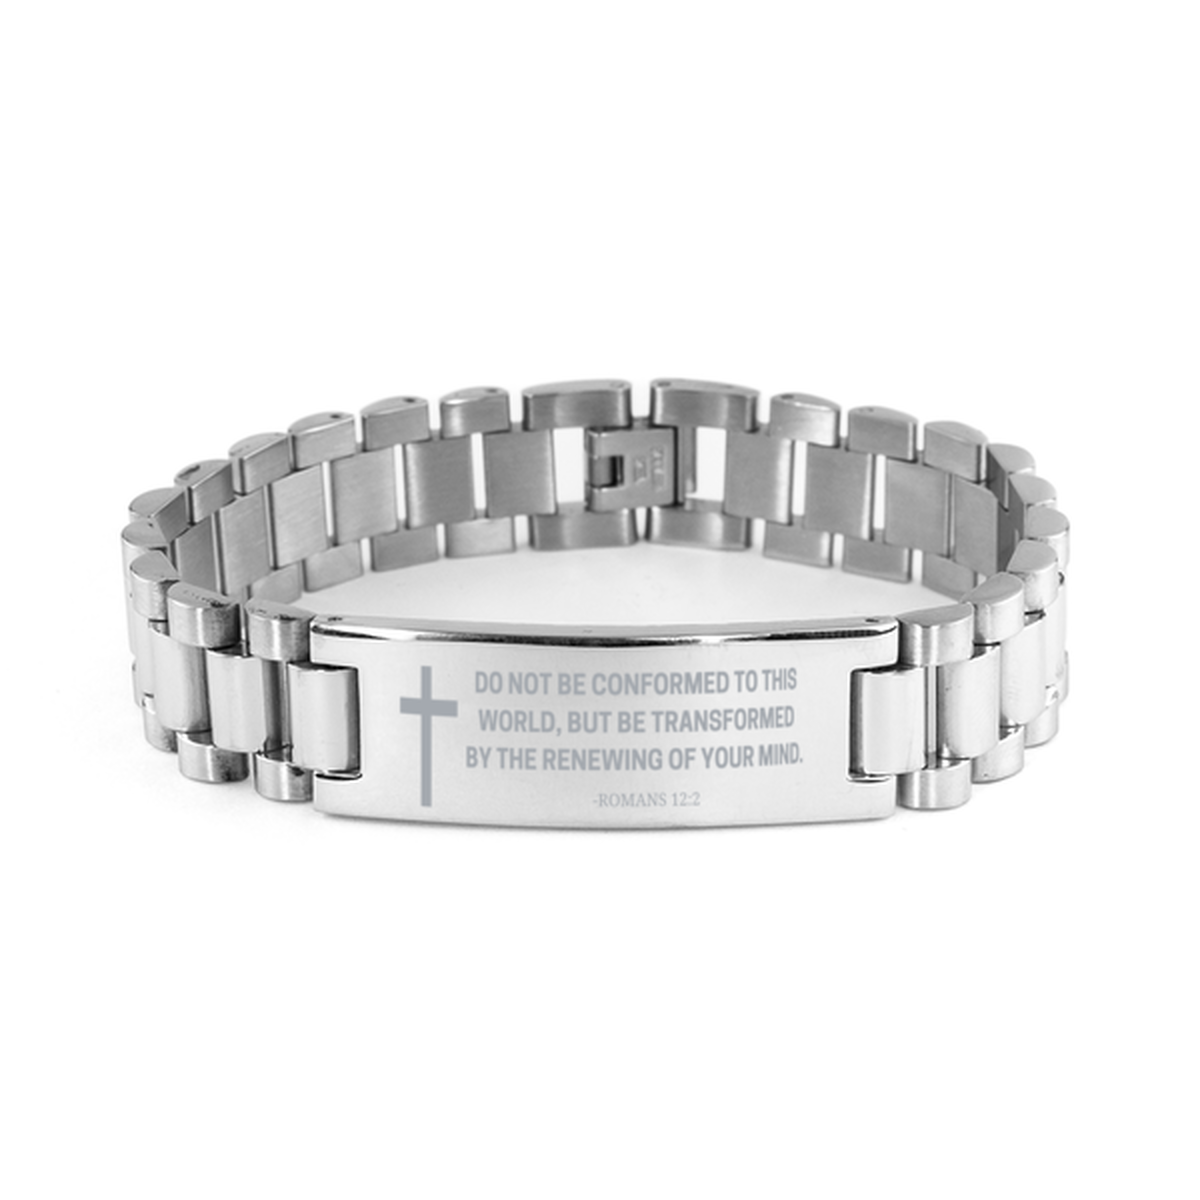 Baptism Gifts For Teenage Boys Girls, Christian Bible Verse Ladder Stainless Steel Bracelet, Do not be conformed to this world, Catholic Confirmation Gifts for Son, Godson, Grandson, Nephew